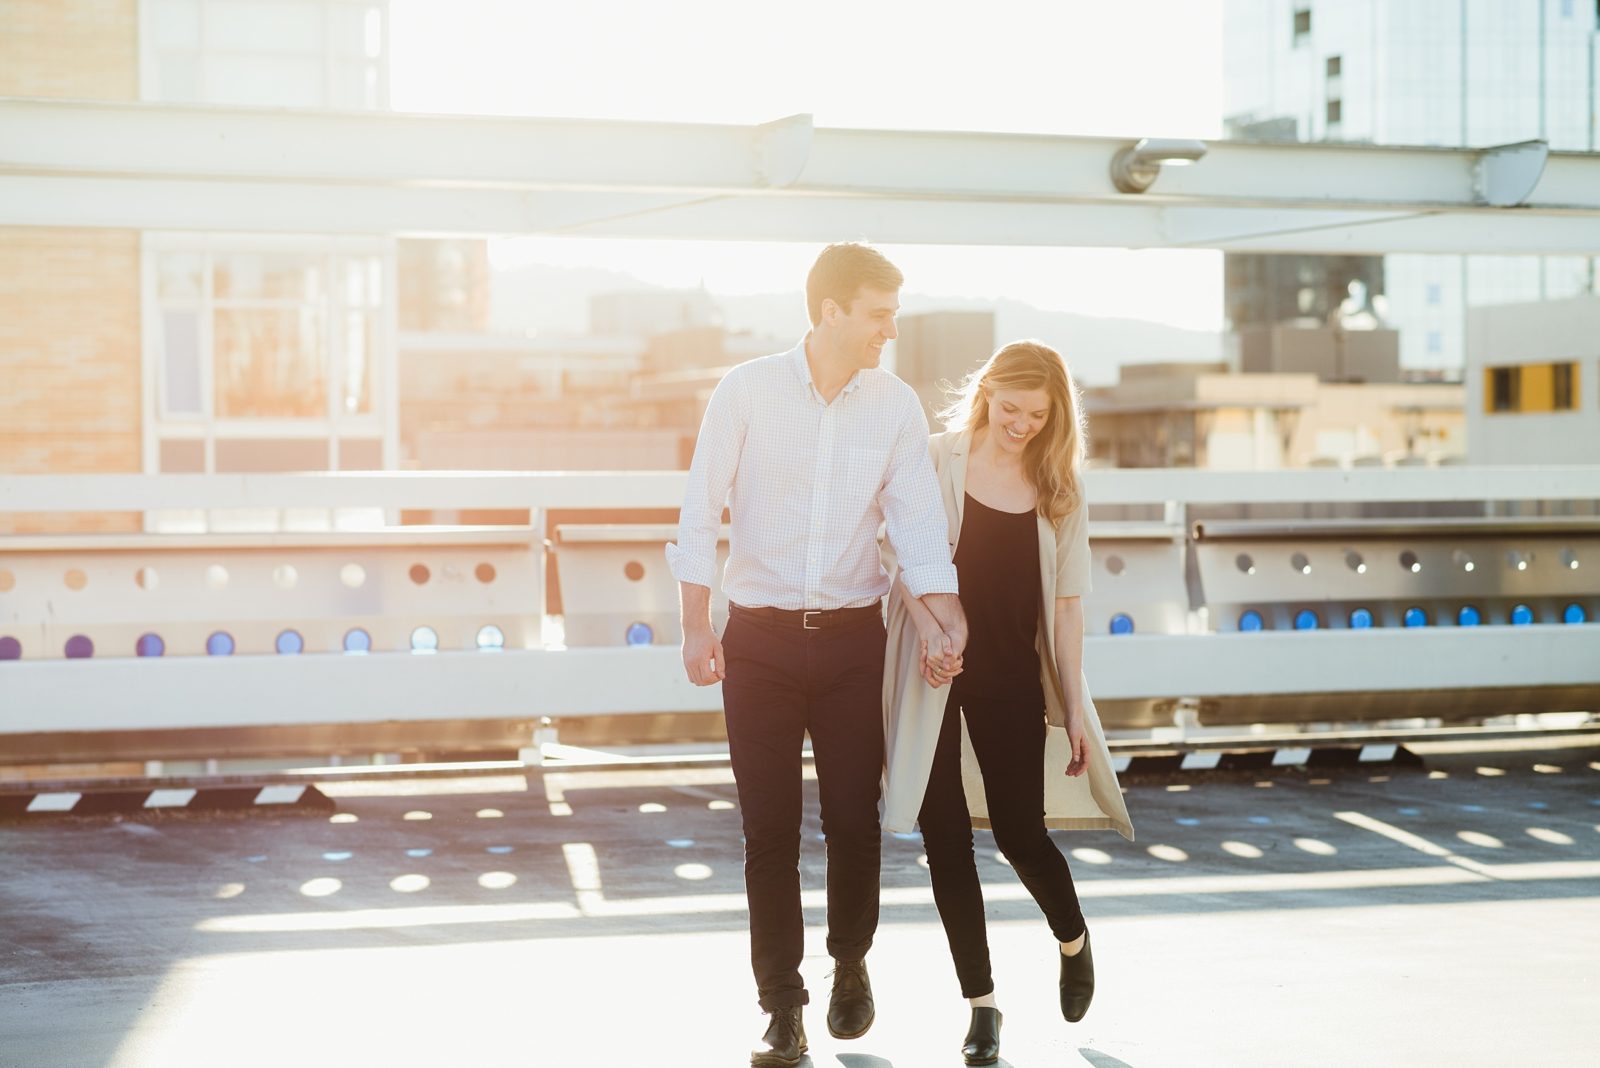 Rooftop engagement session with stylish couple in downtown Portland, Oregon.